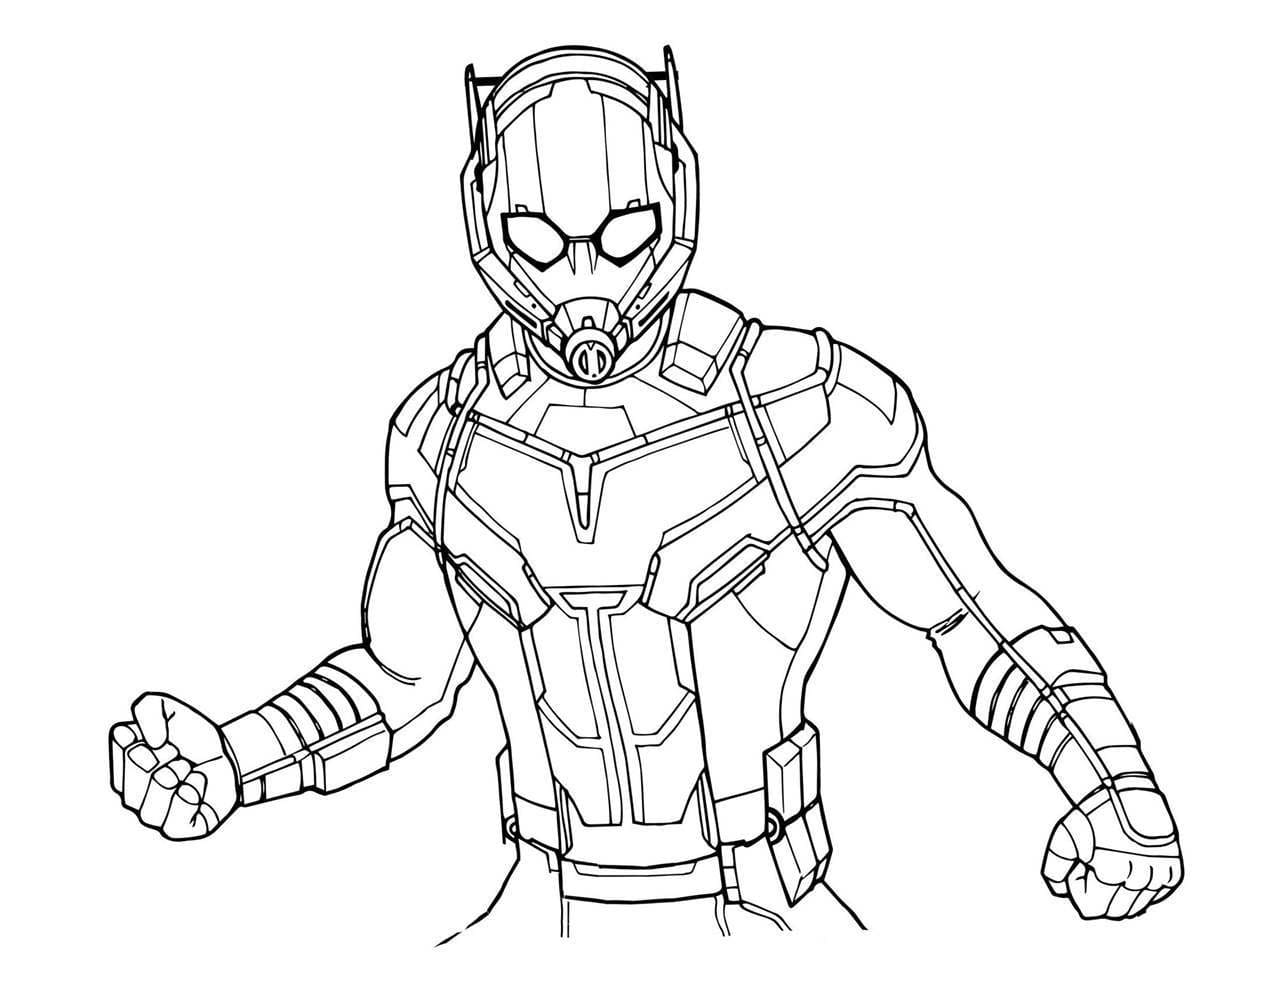 Ant-Man 2 Coloring Page - Free Printable Coloring Pages for Kids